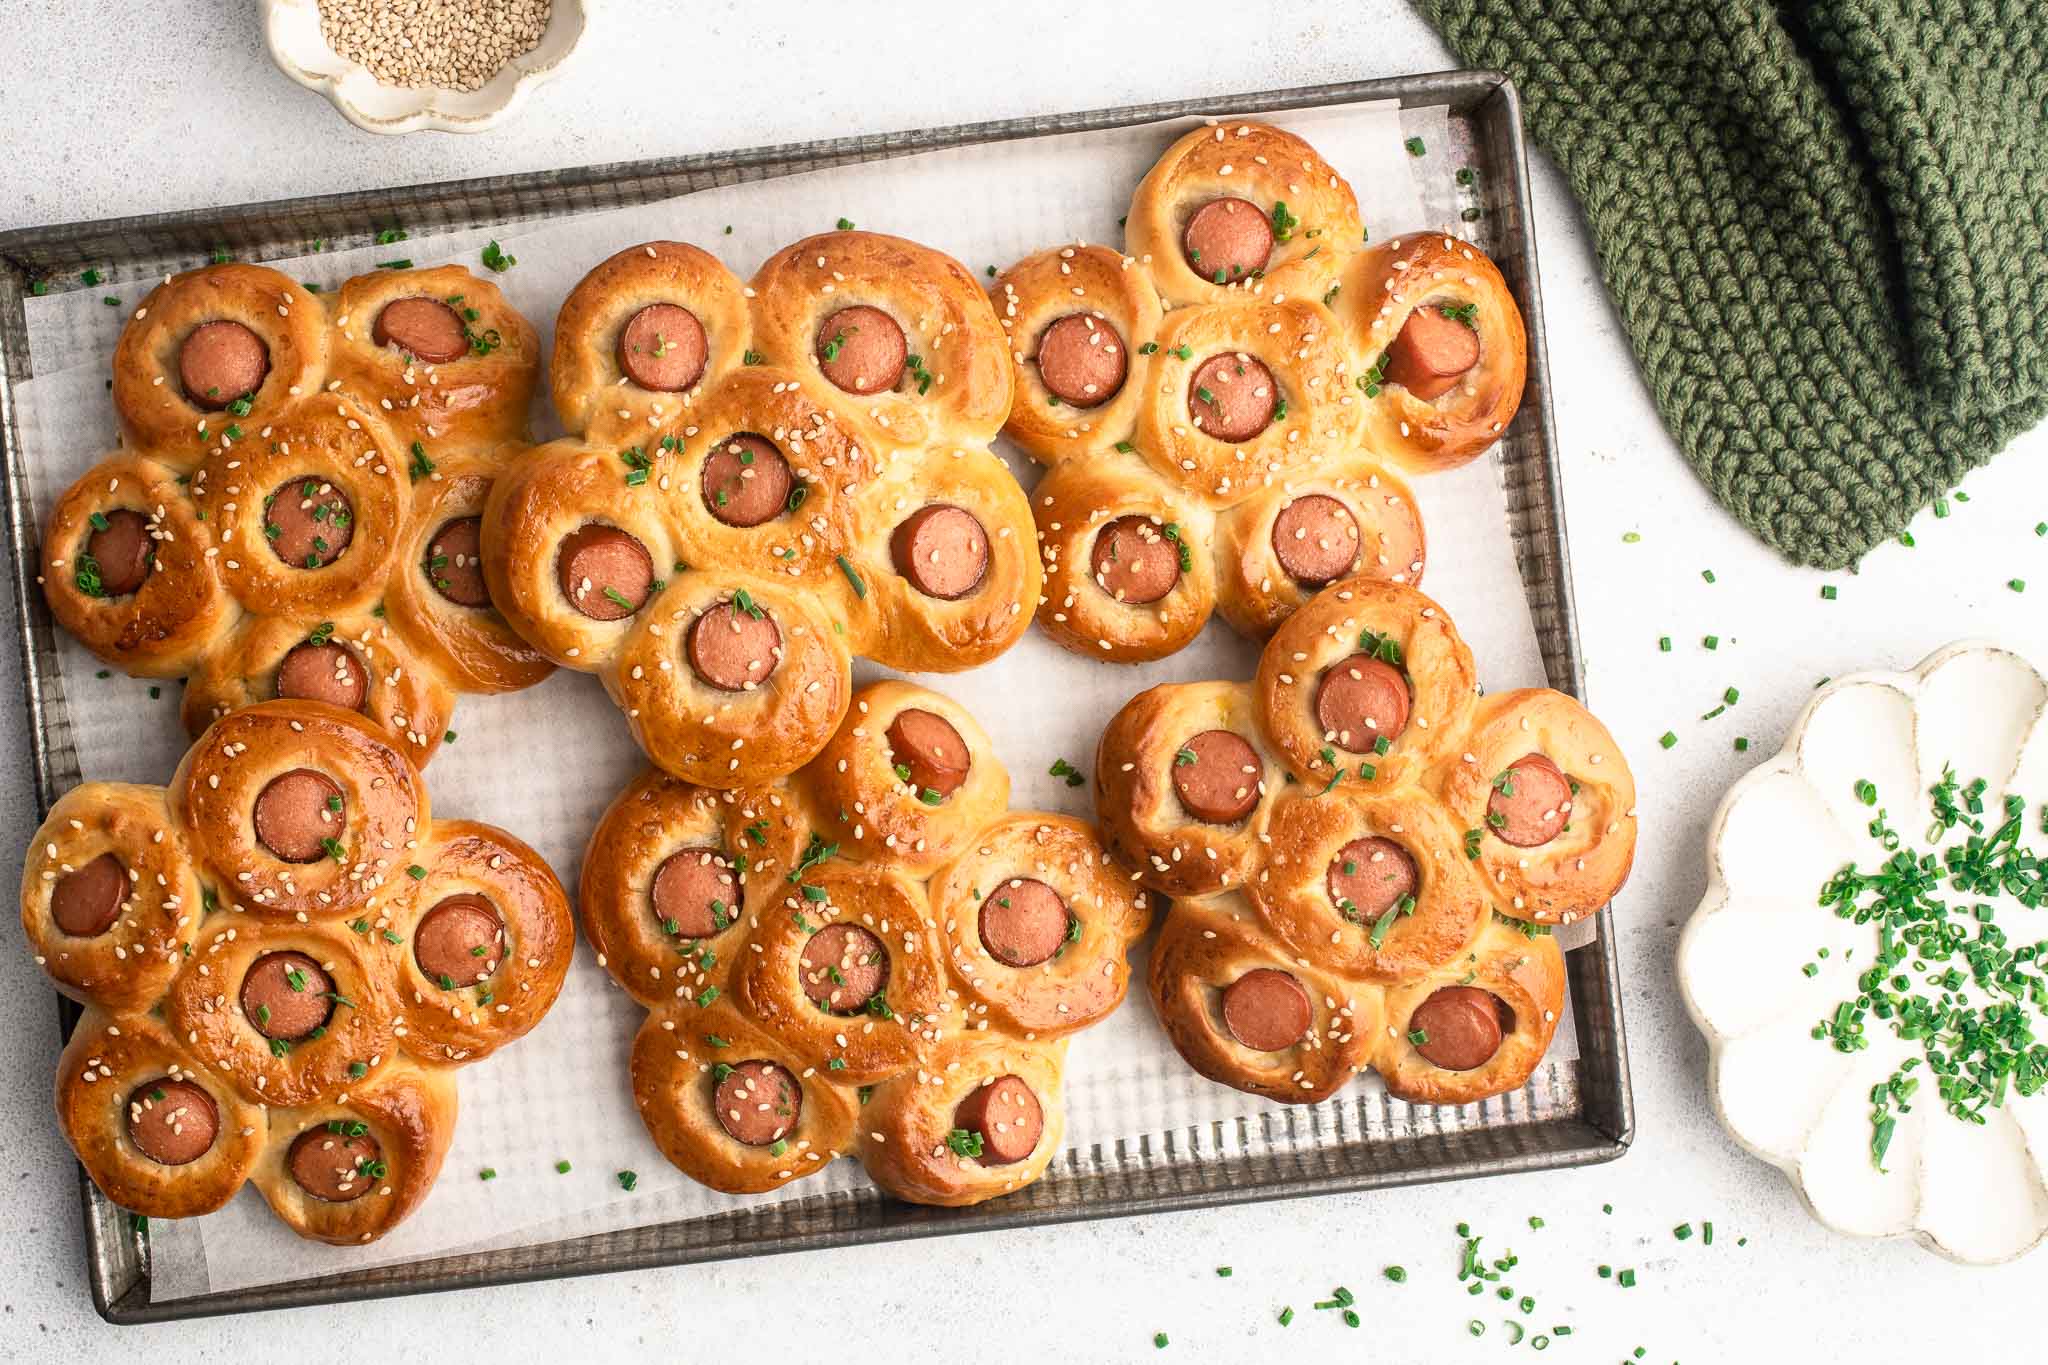 hot dog flower buns with sesame seeds and scallions